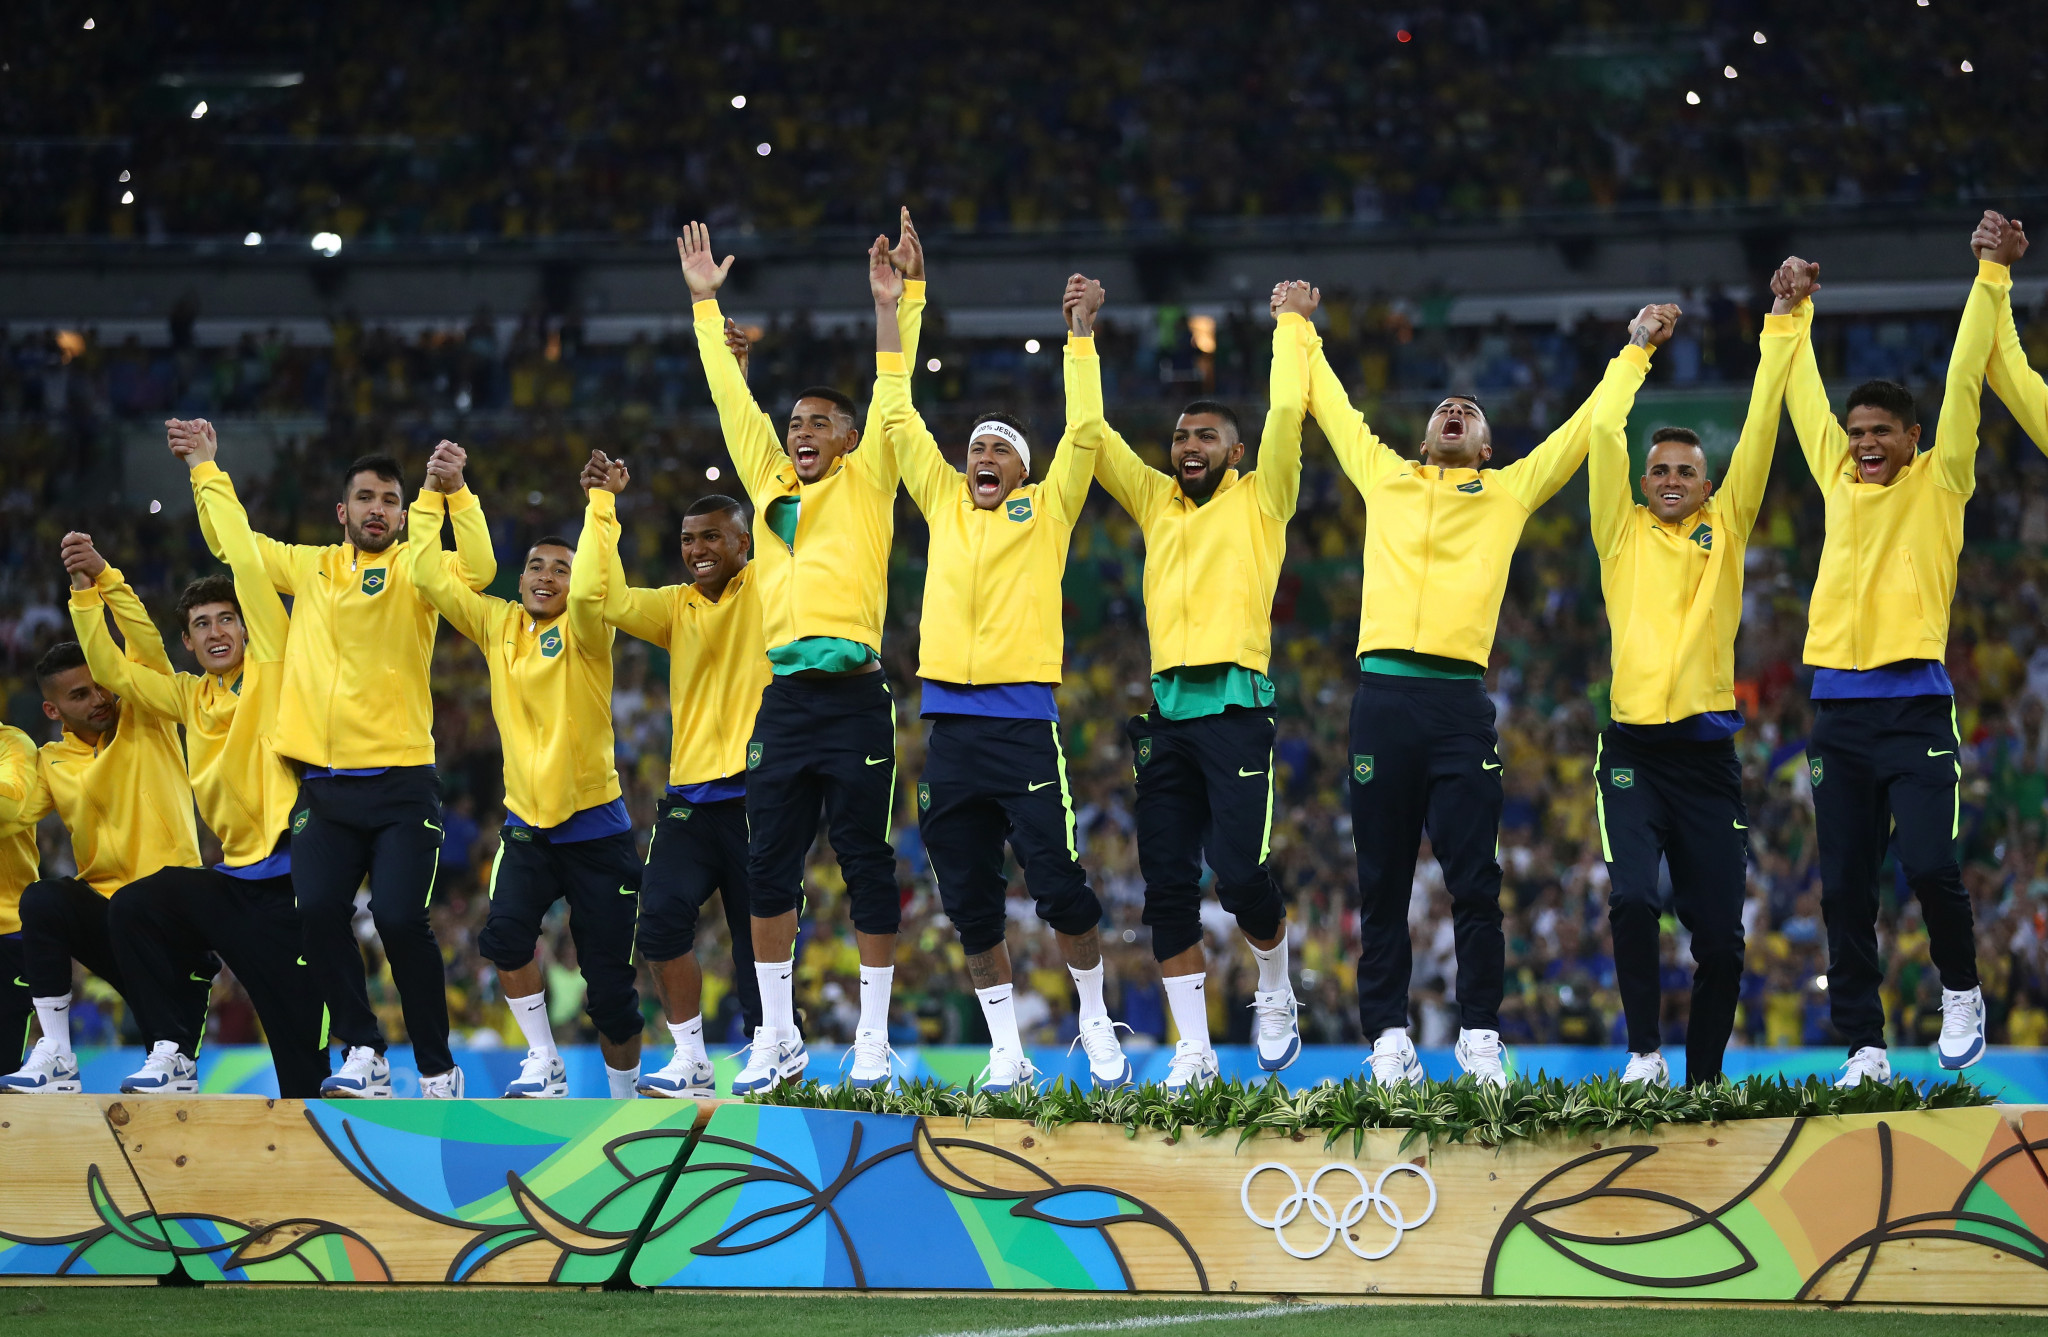 Brazil will begin their defence of their Olympic crown against Rio 2016 silver medallists Germany ©Getty Images